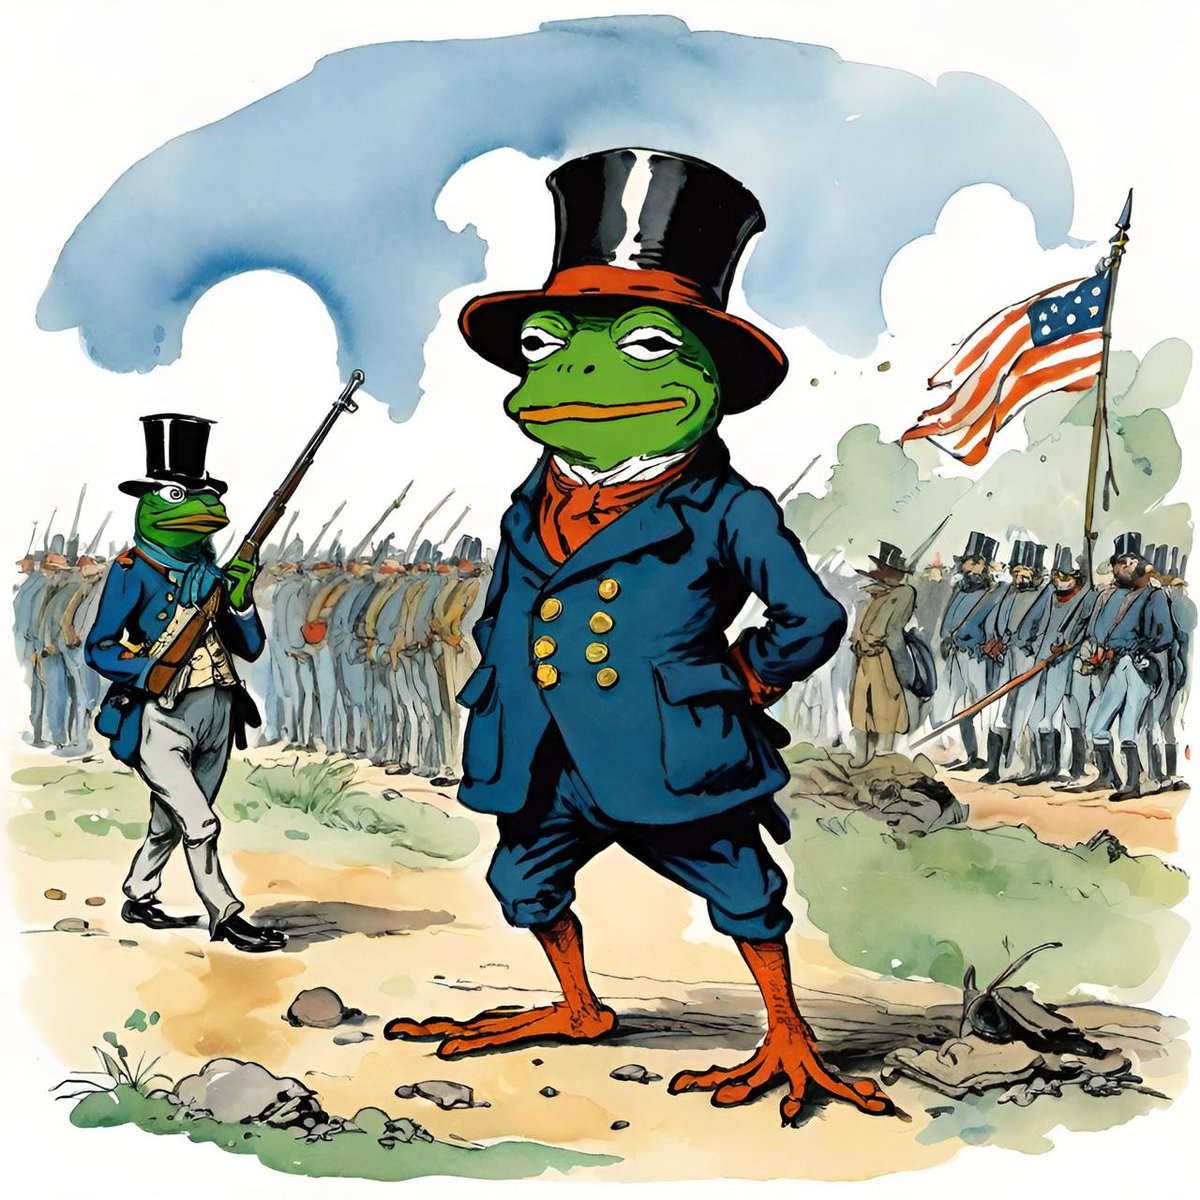 Fren rallies the troops.

'There will come a day when the courage of men fails, but today is not that day! We will never call them 'ma'am'! HOLD THE LINE!'